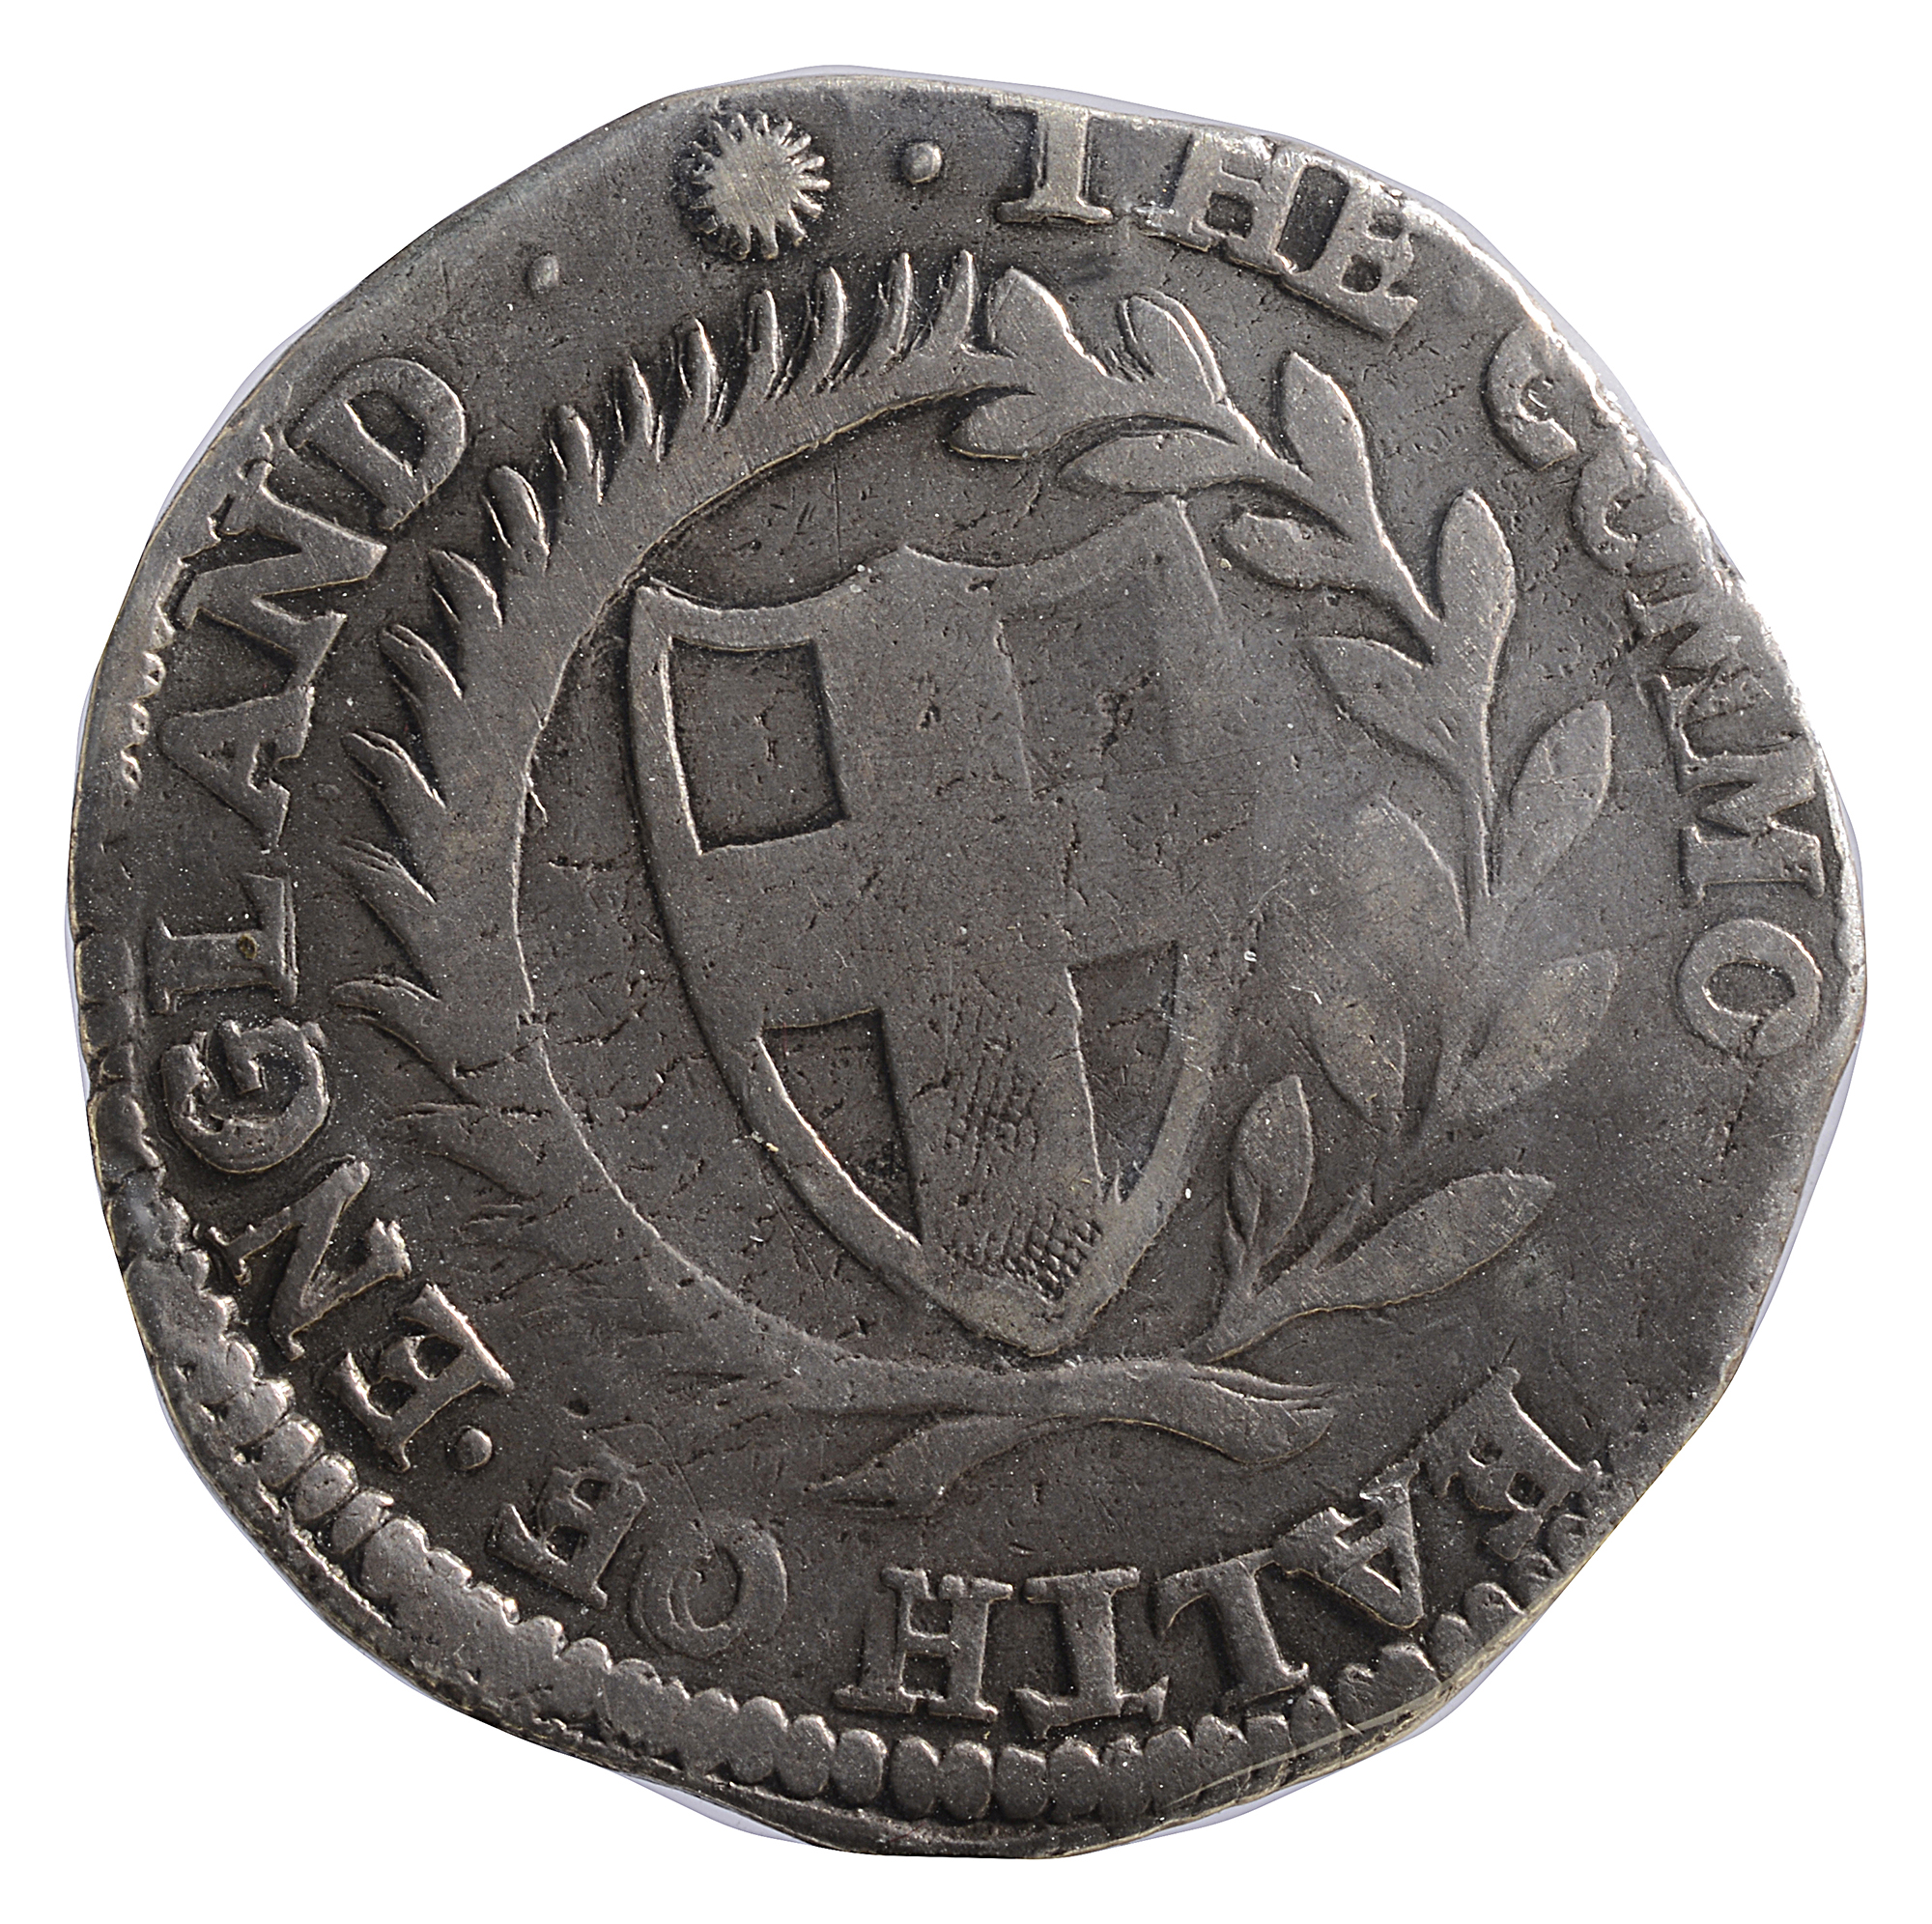 Commonwealth Silver Halfcrown1653.English shield within laurel and palm branch, with legends in